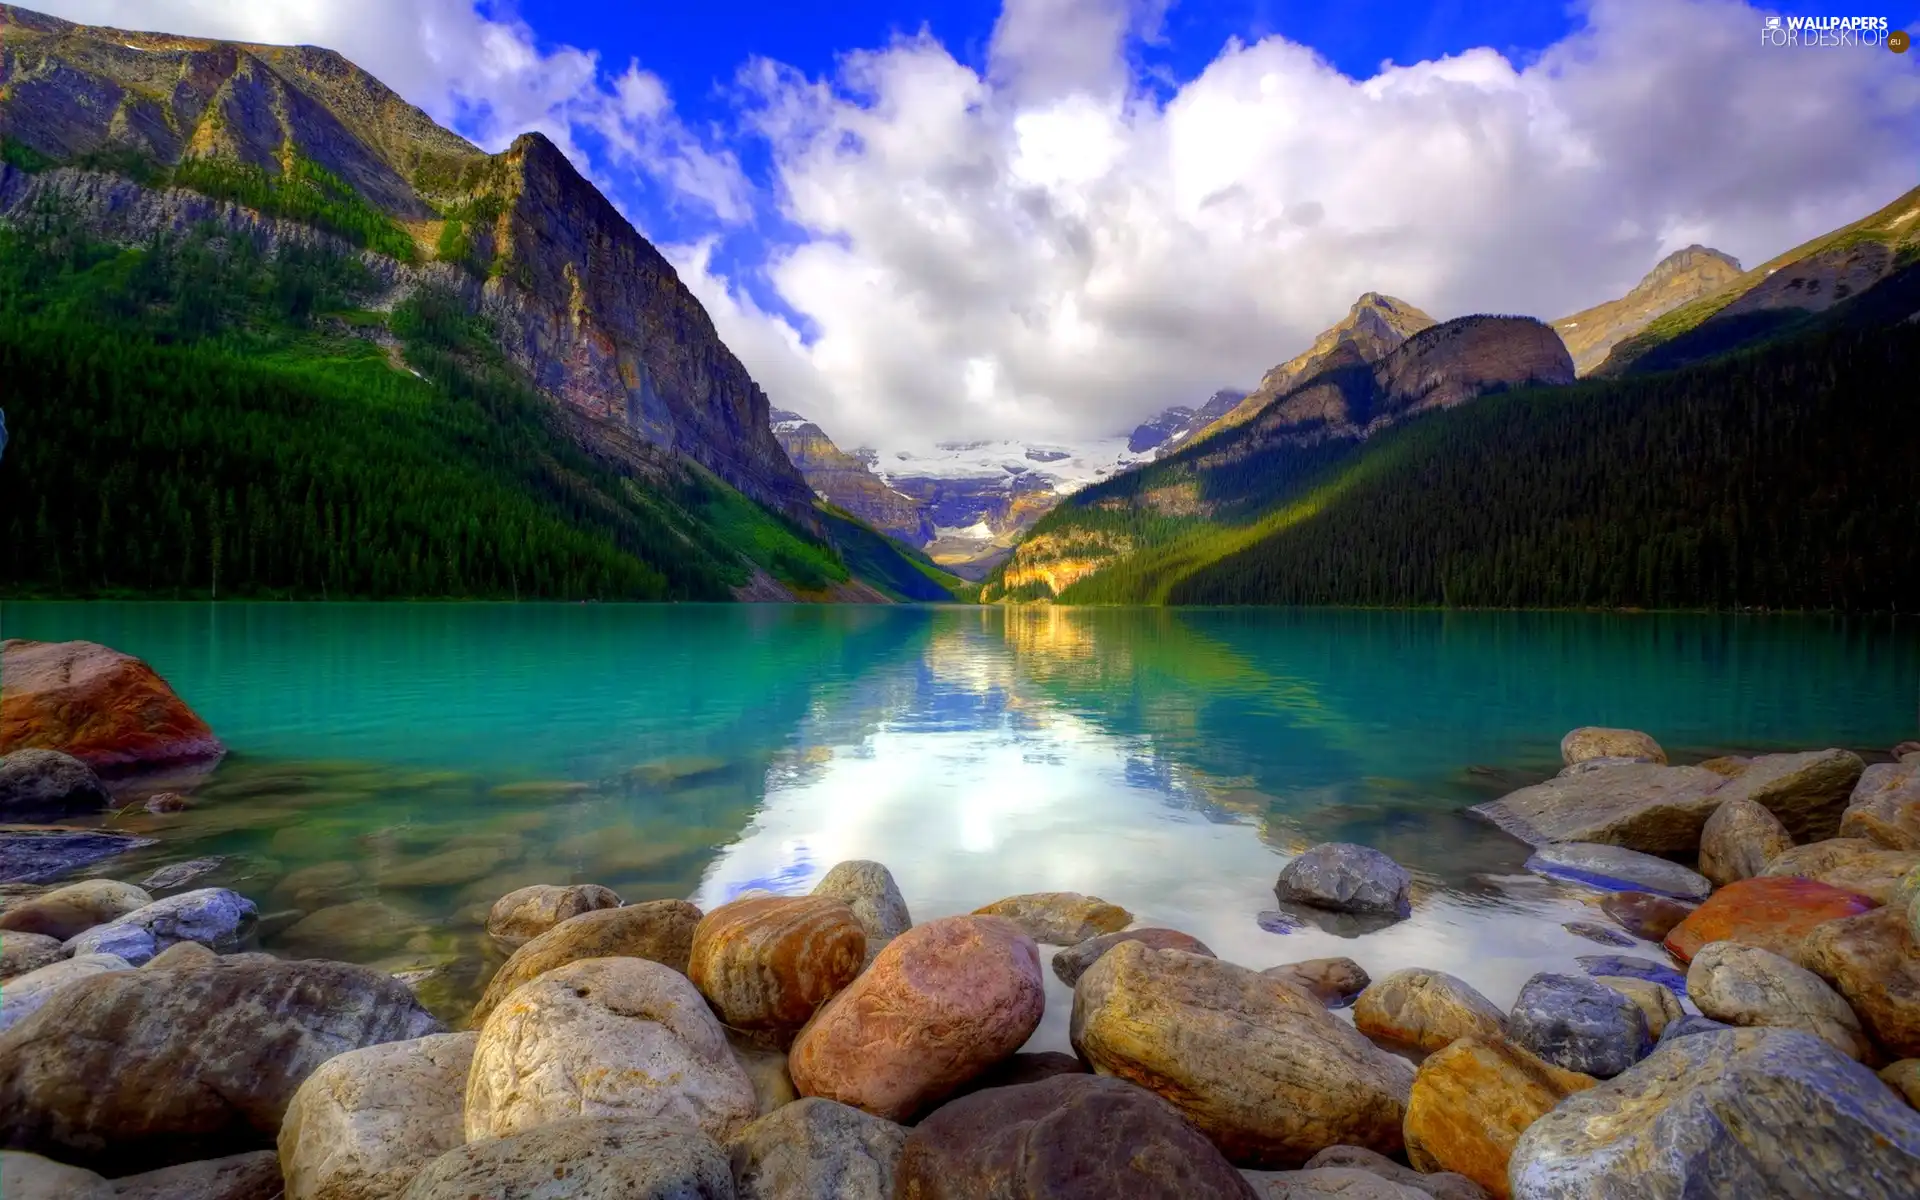 Mountains, clouds, Stones, lake - For desktop wallpapers: 1920x1200